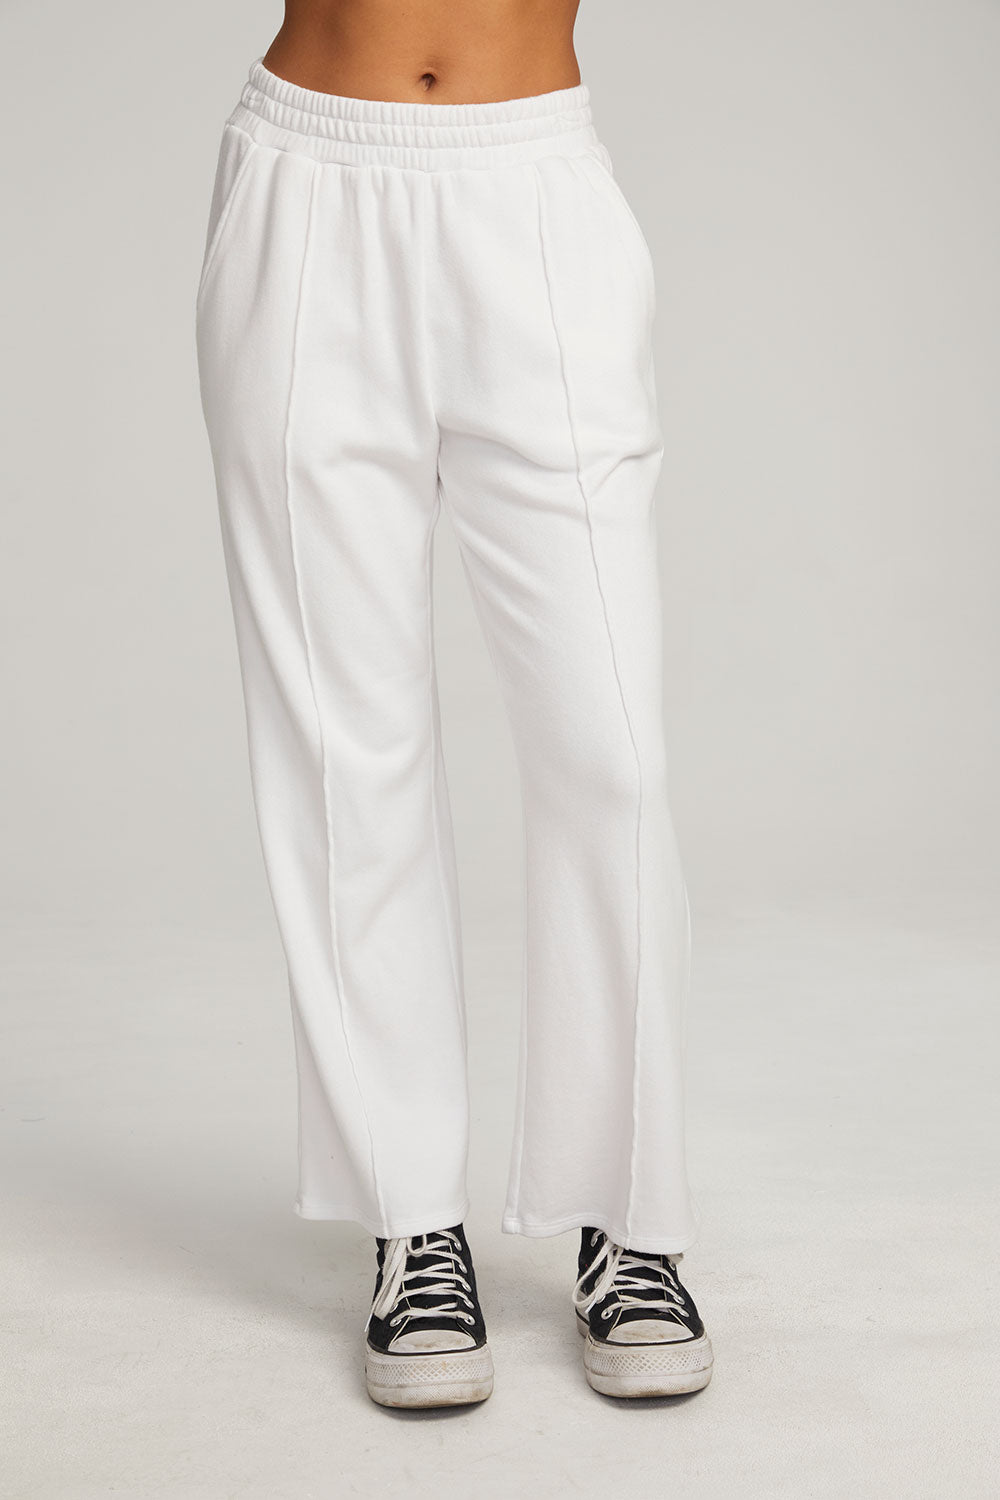 White Trousers For Women